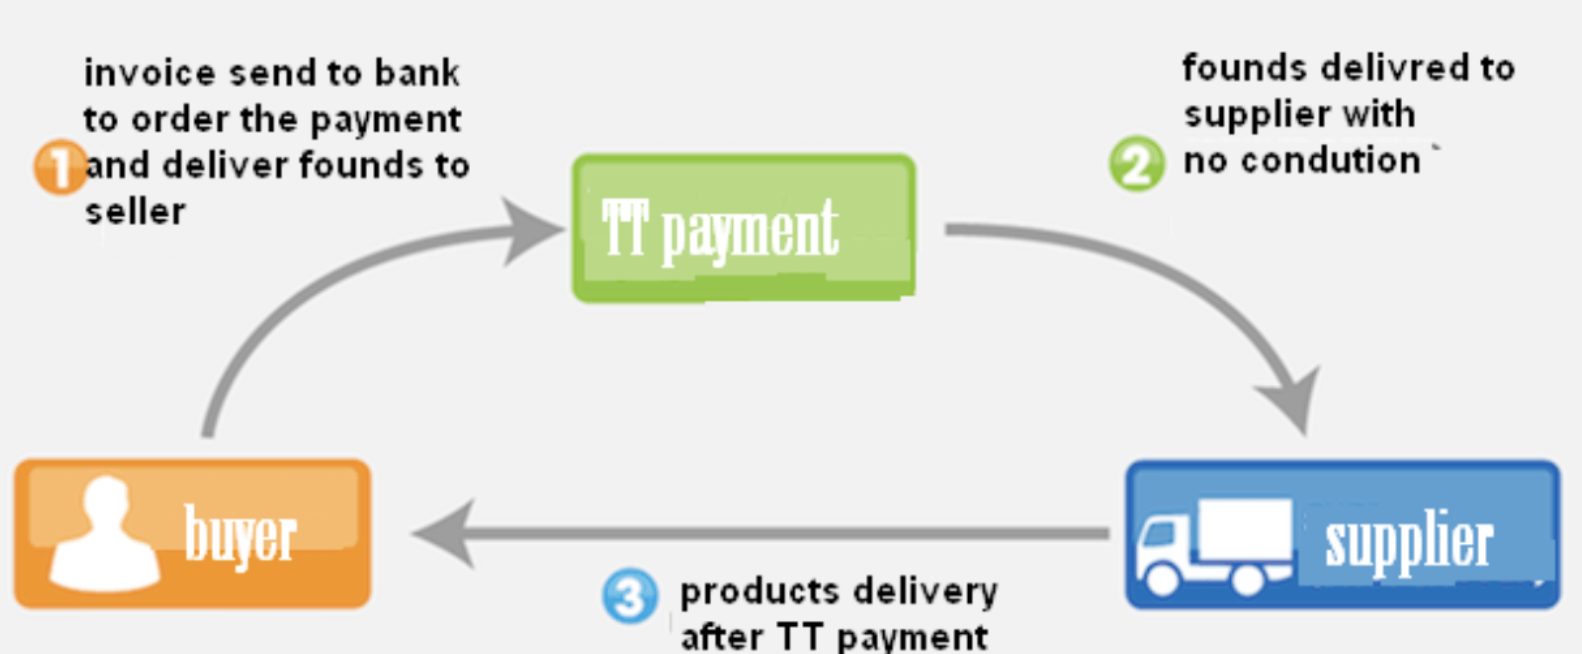 Alibaba Payment No2: Telegraphic Transfer (T/T)